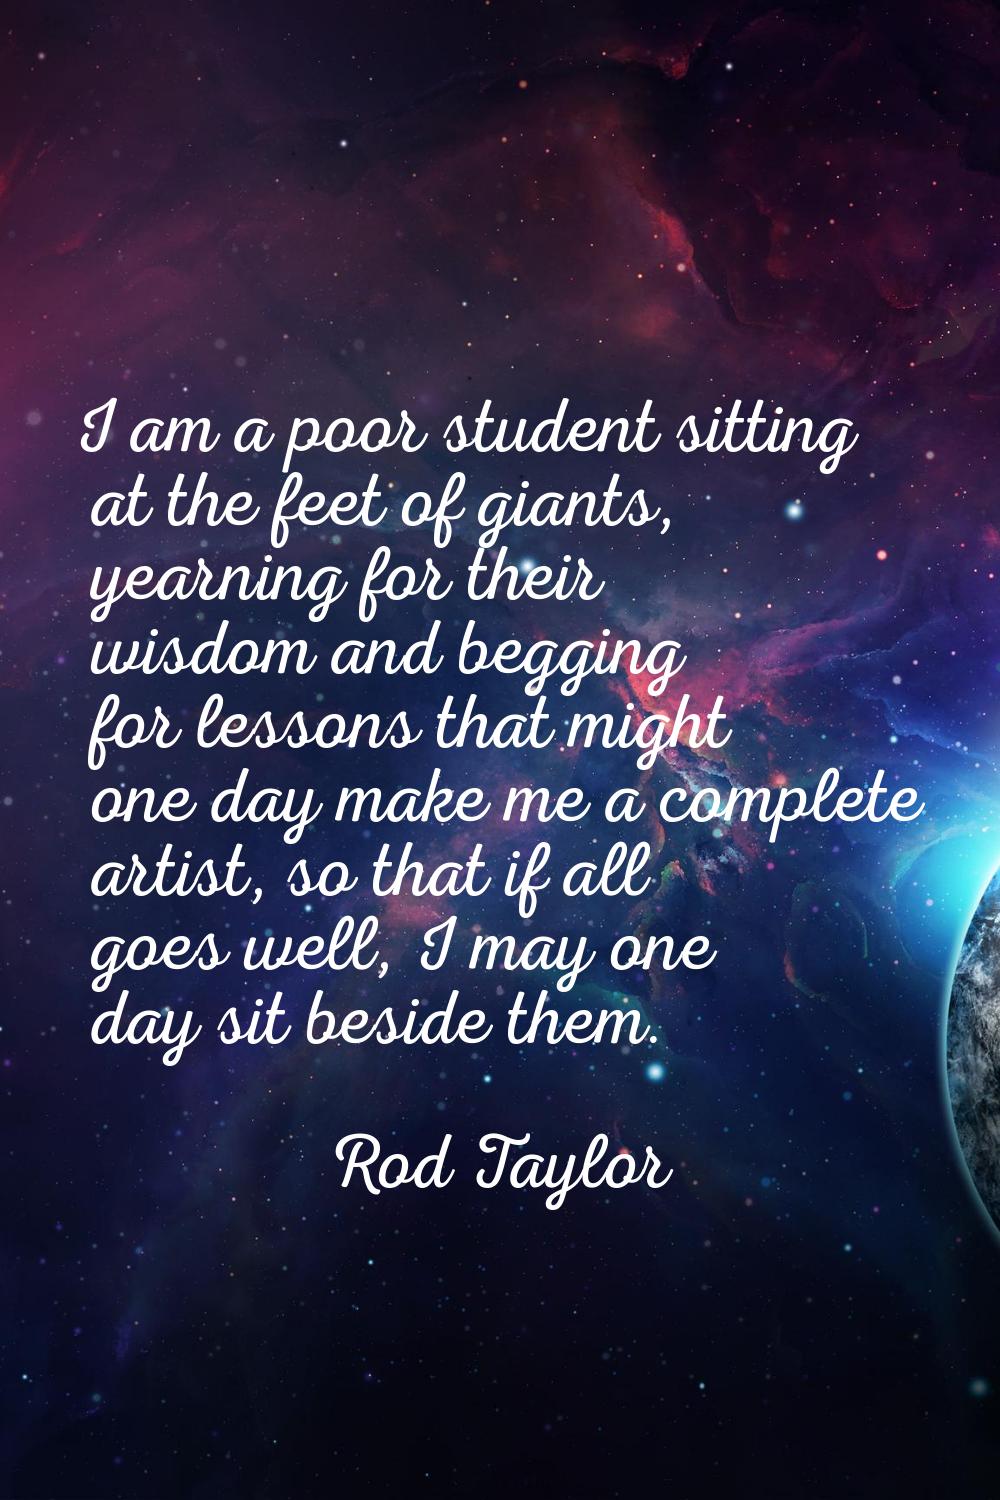 I am a poor student sitting at the feet of giants, yearning for their wisdom and begging for lesson